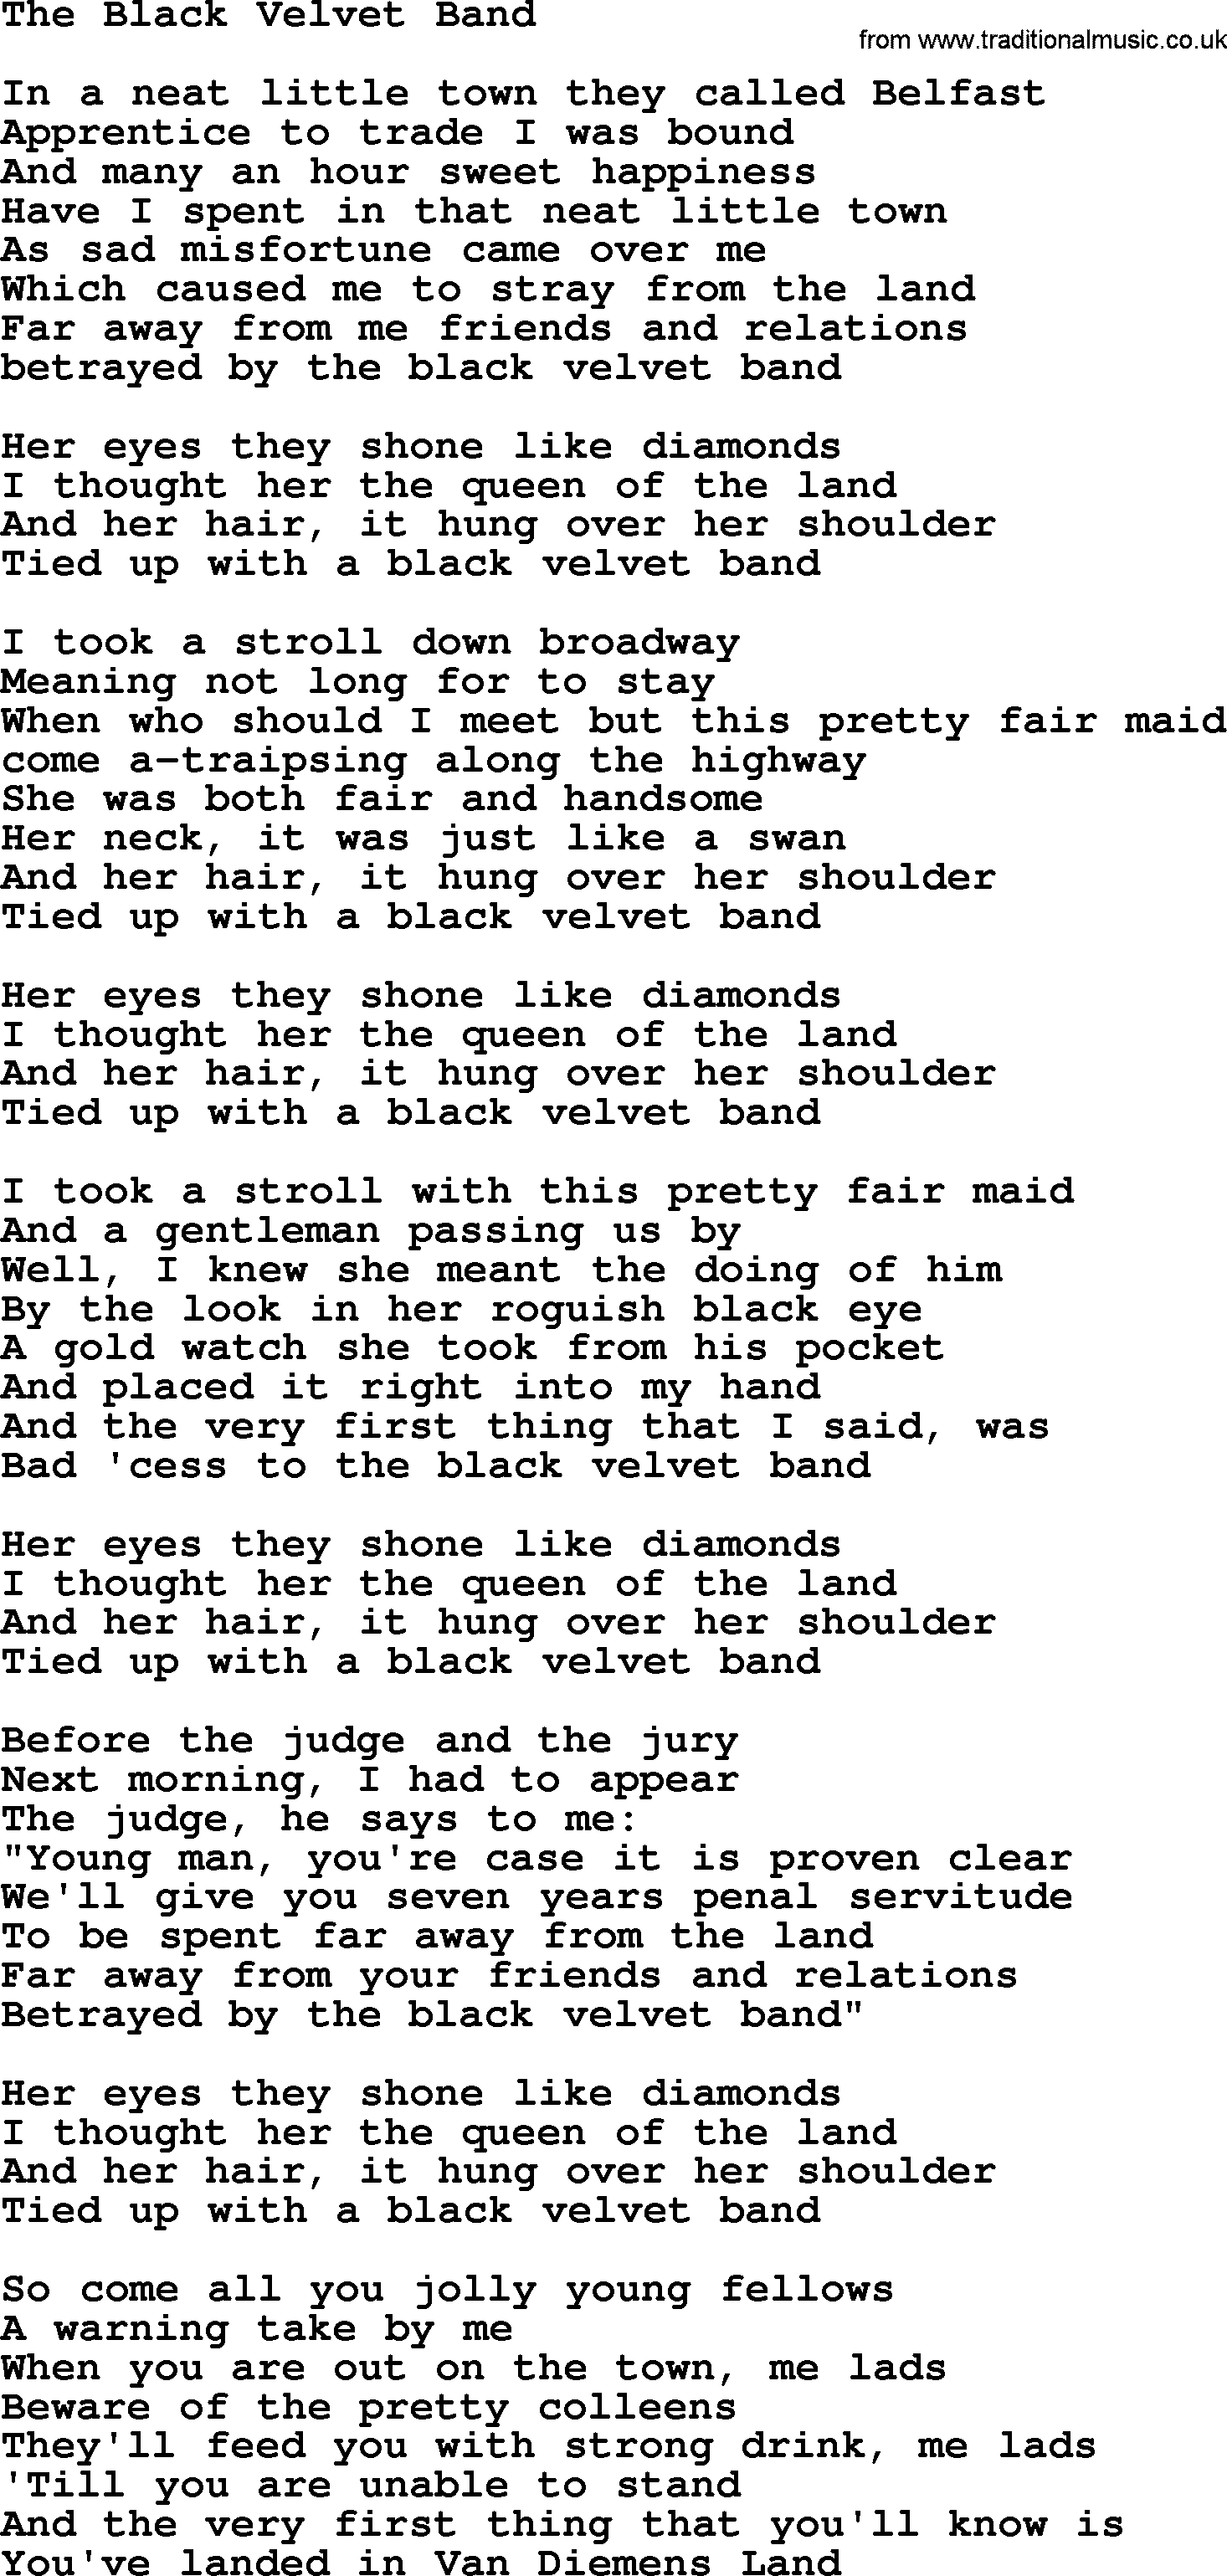 The Black Velvet Band by The Dubliners - song lyrics and chords